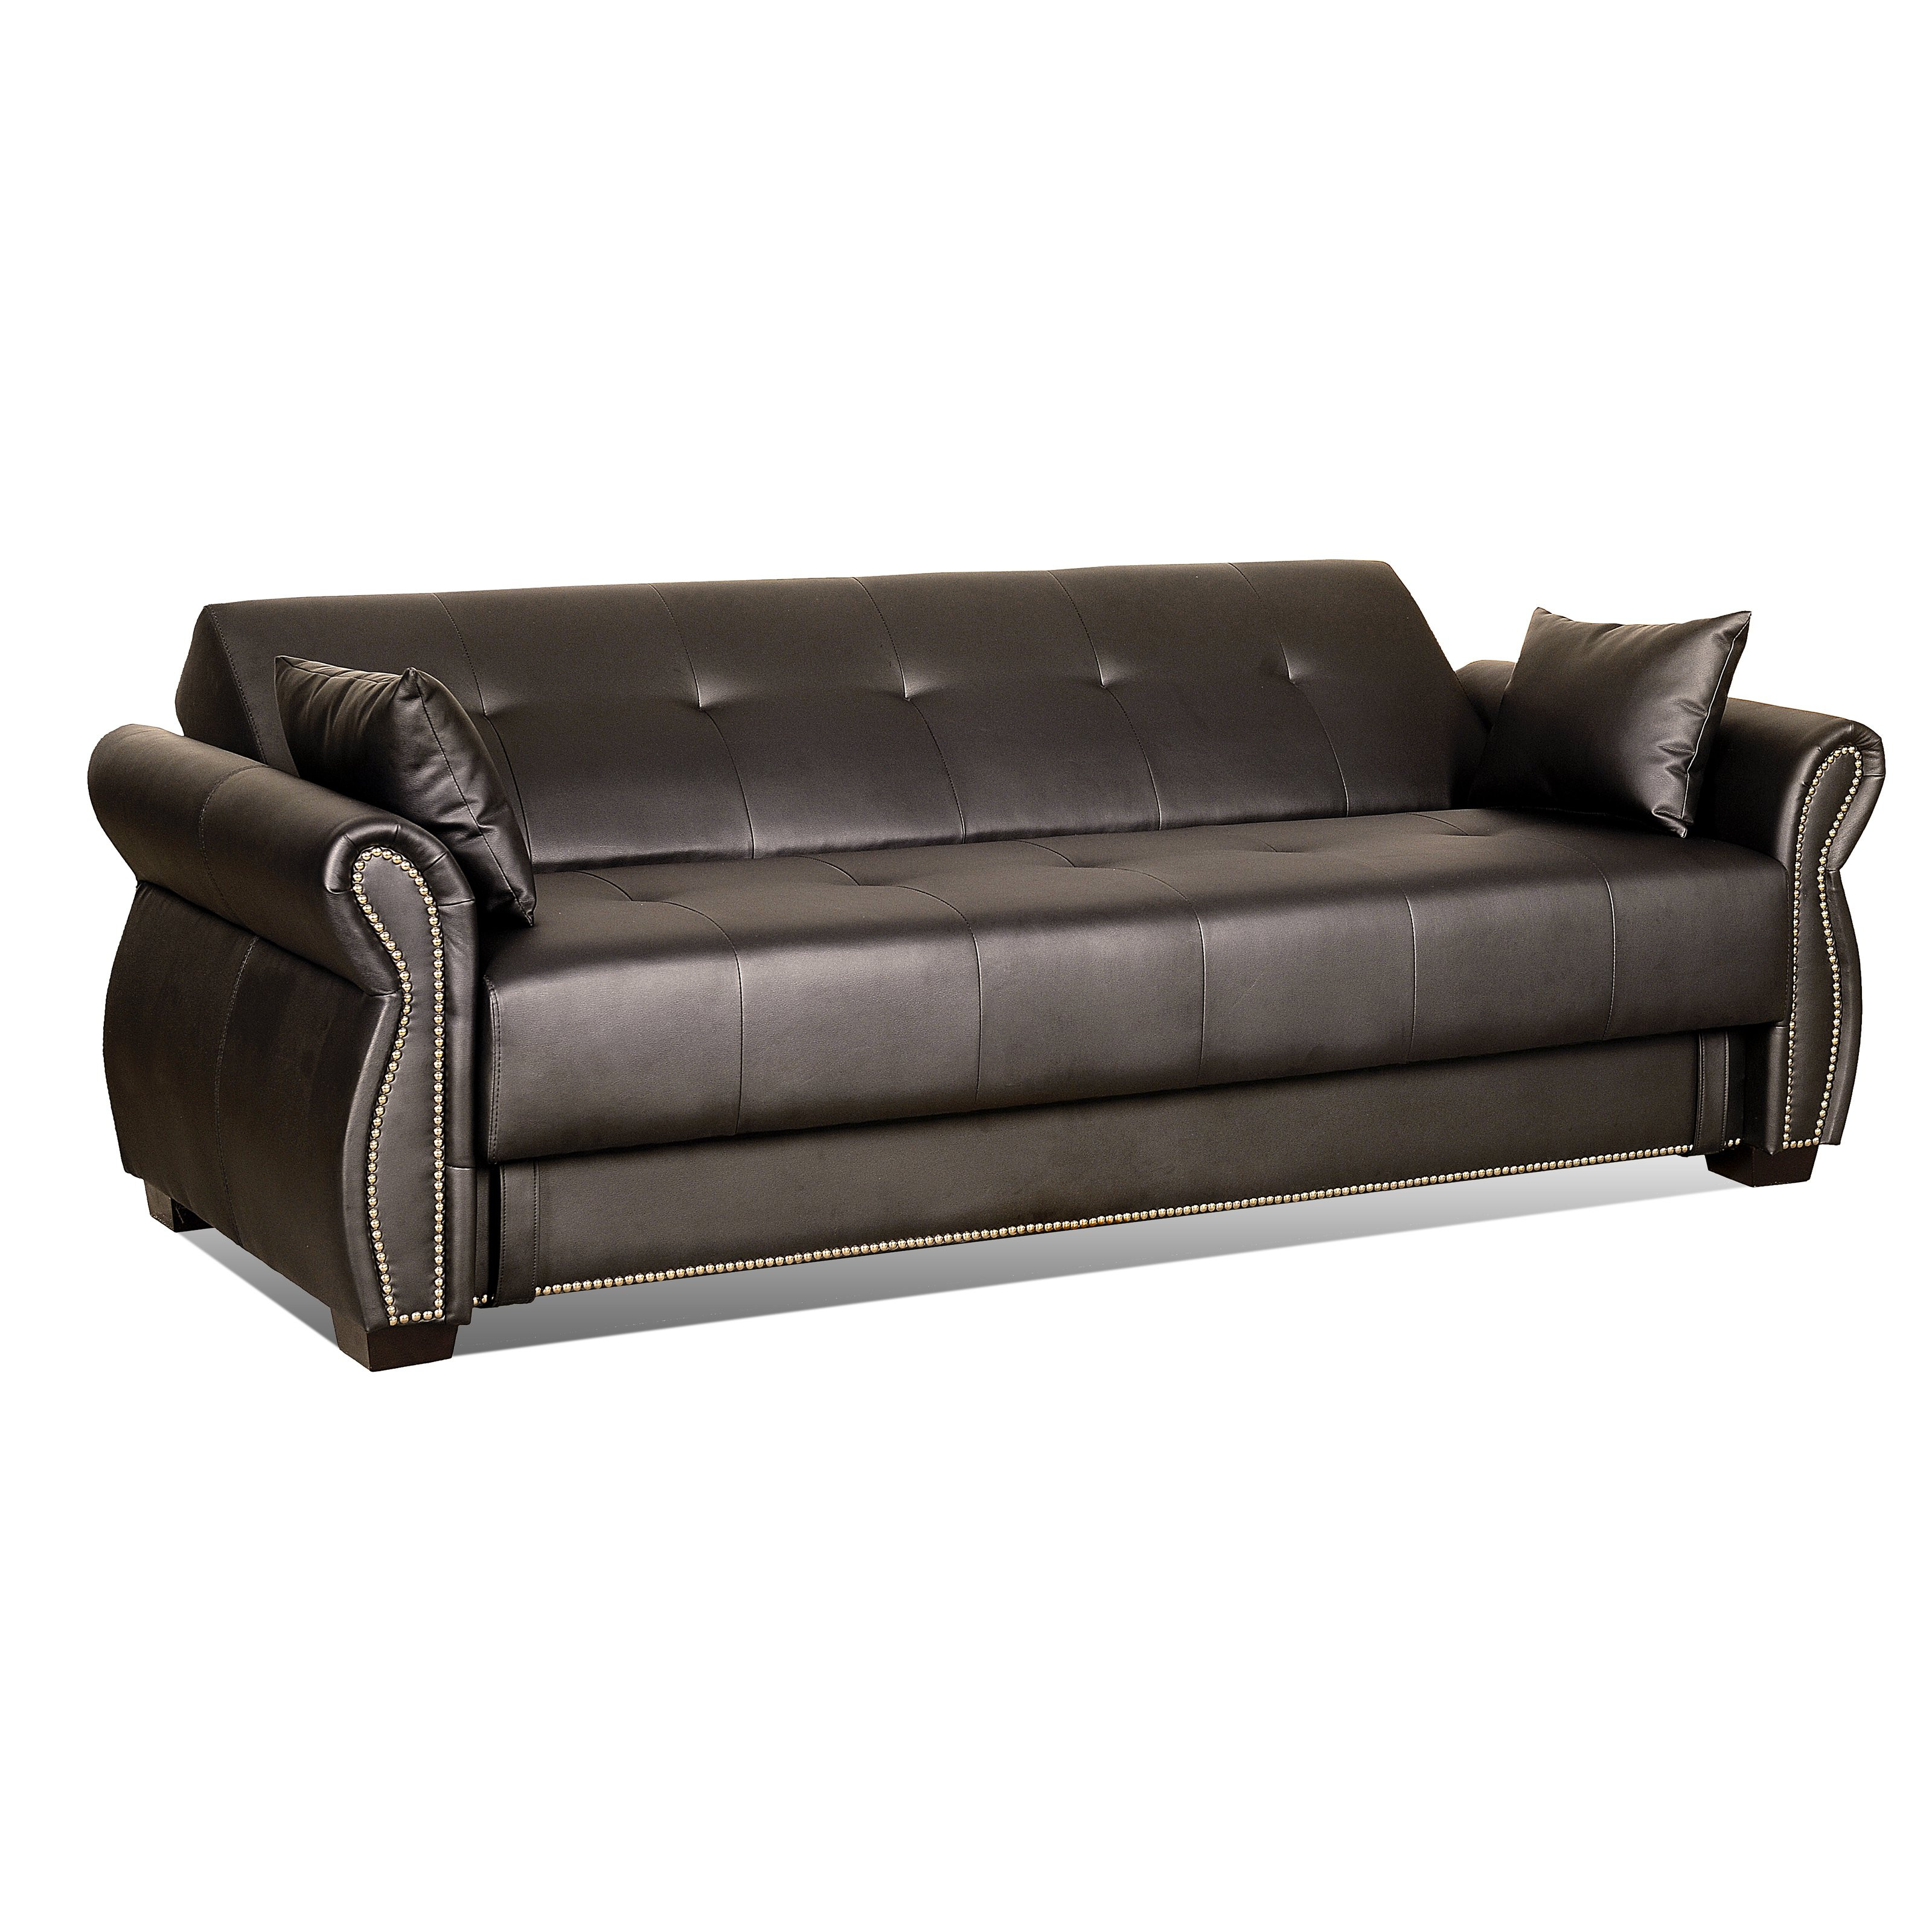 Best ideas about Serta Meredith Convertible Sofa
. Save or Pin Serta Meredith Convertible Sofa Reviews Now.